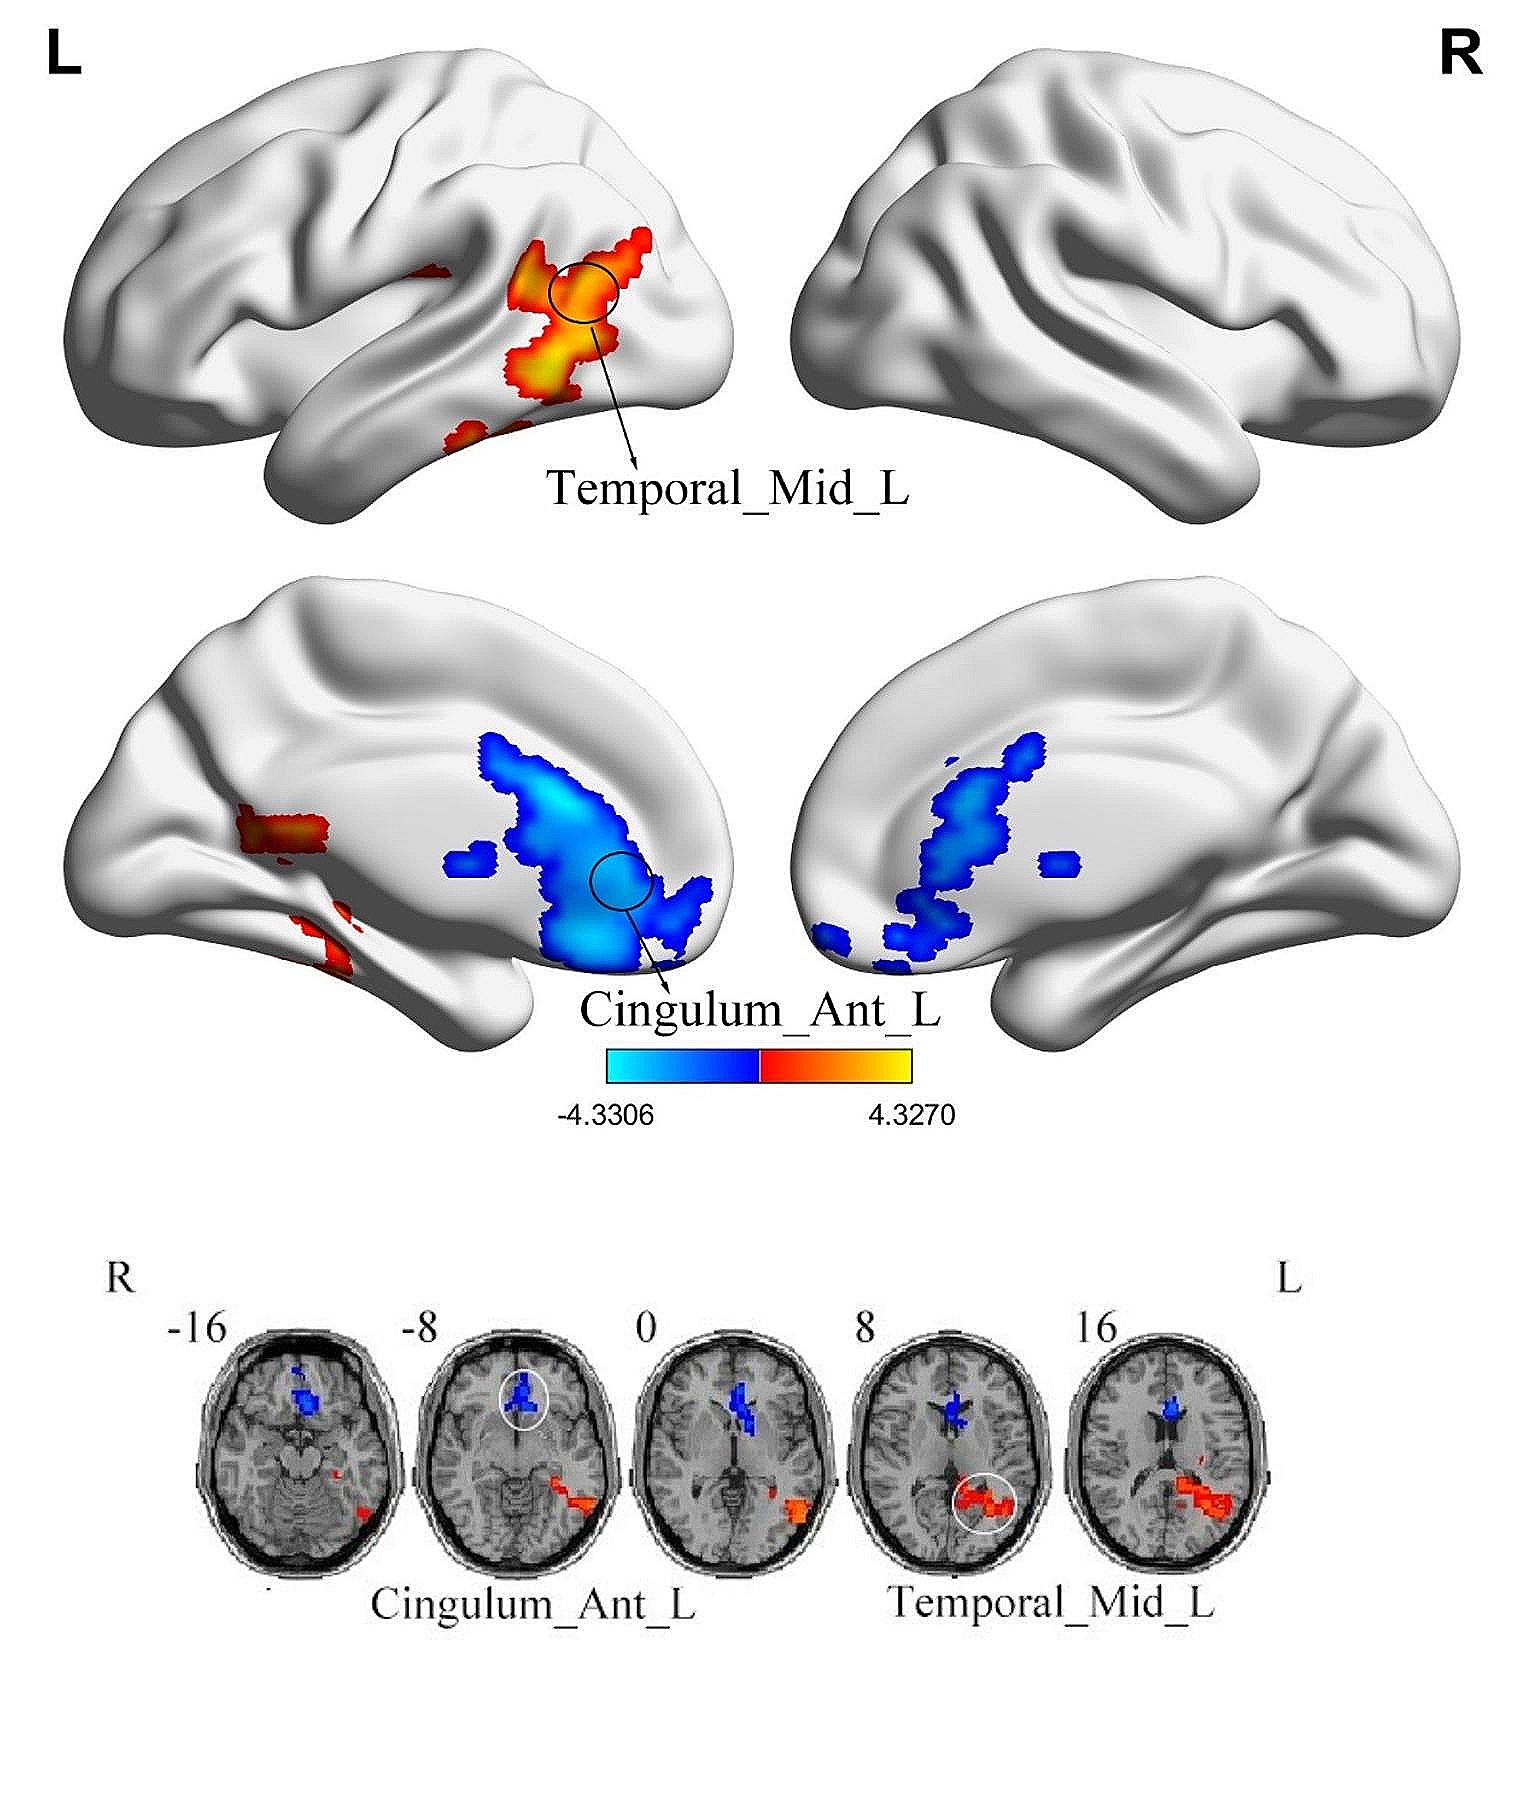 Alterations in degree centrality and functional connectivity in tension-type headache: a resting-state fMRI study